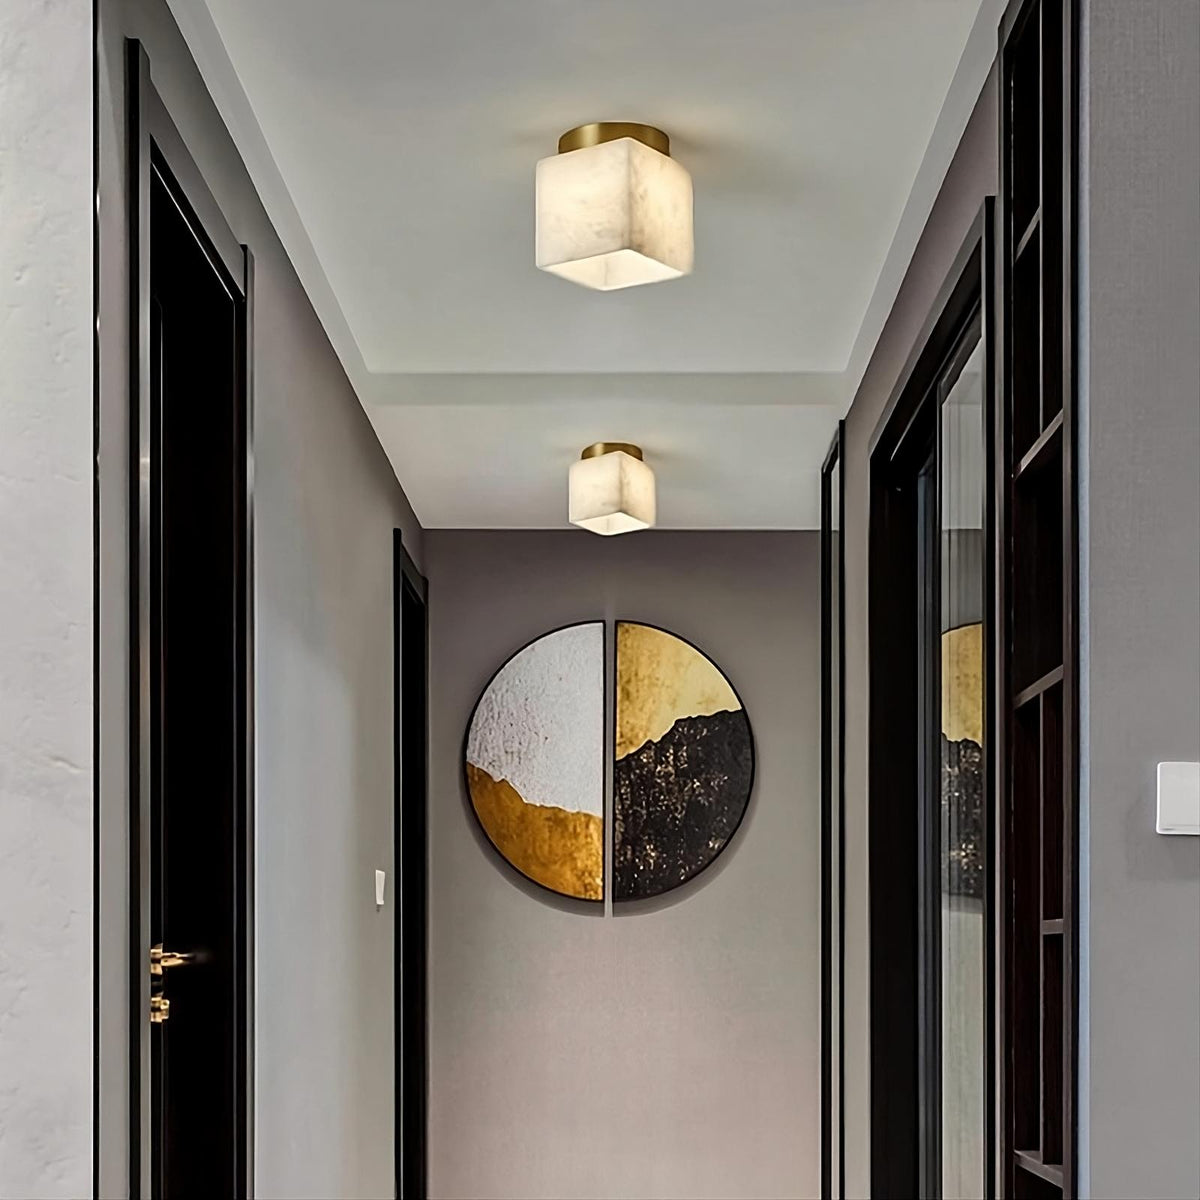 A narrow hallway featuring two modern LED light fixtures with cubic designs. The corridor, painted gray with black trim on the doors, is adorned with Spanish marble flooring. At the end of the hallway, a Natural Marble Hallway Ceiling Light Fixture by Morsale.com catches the eye.